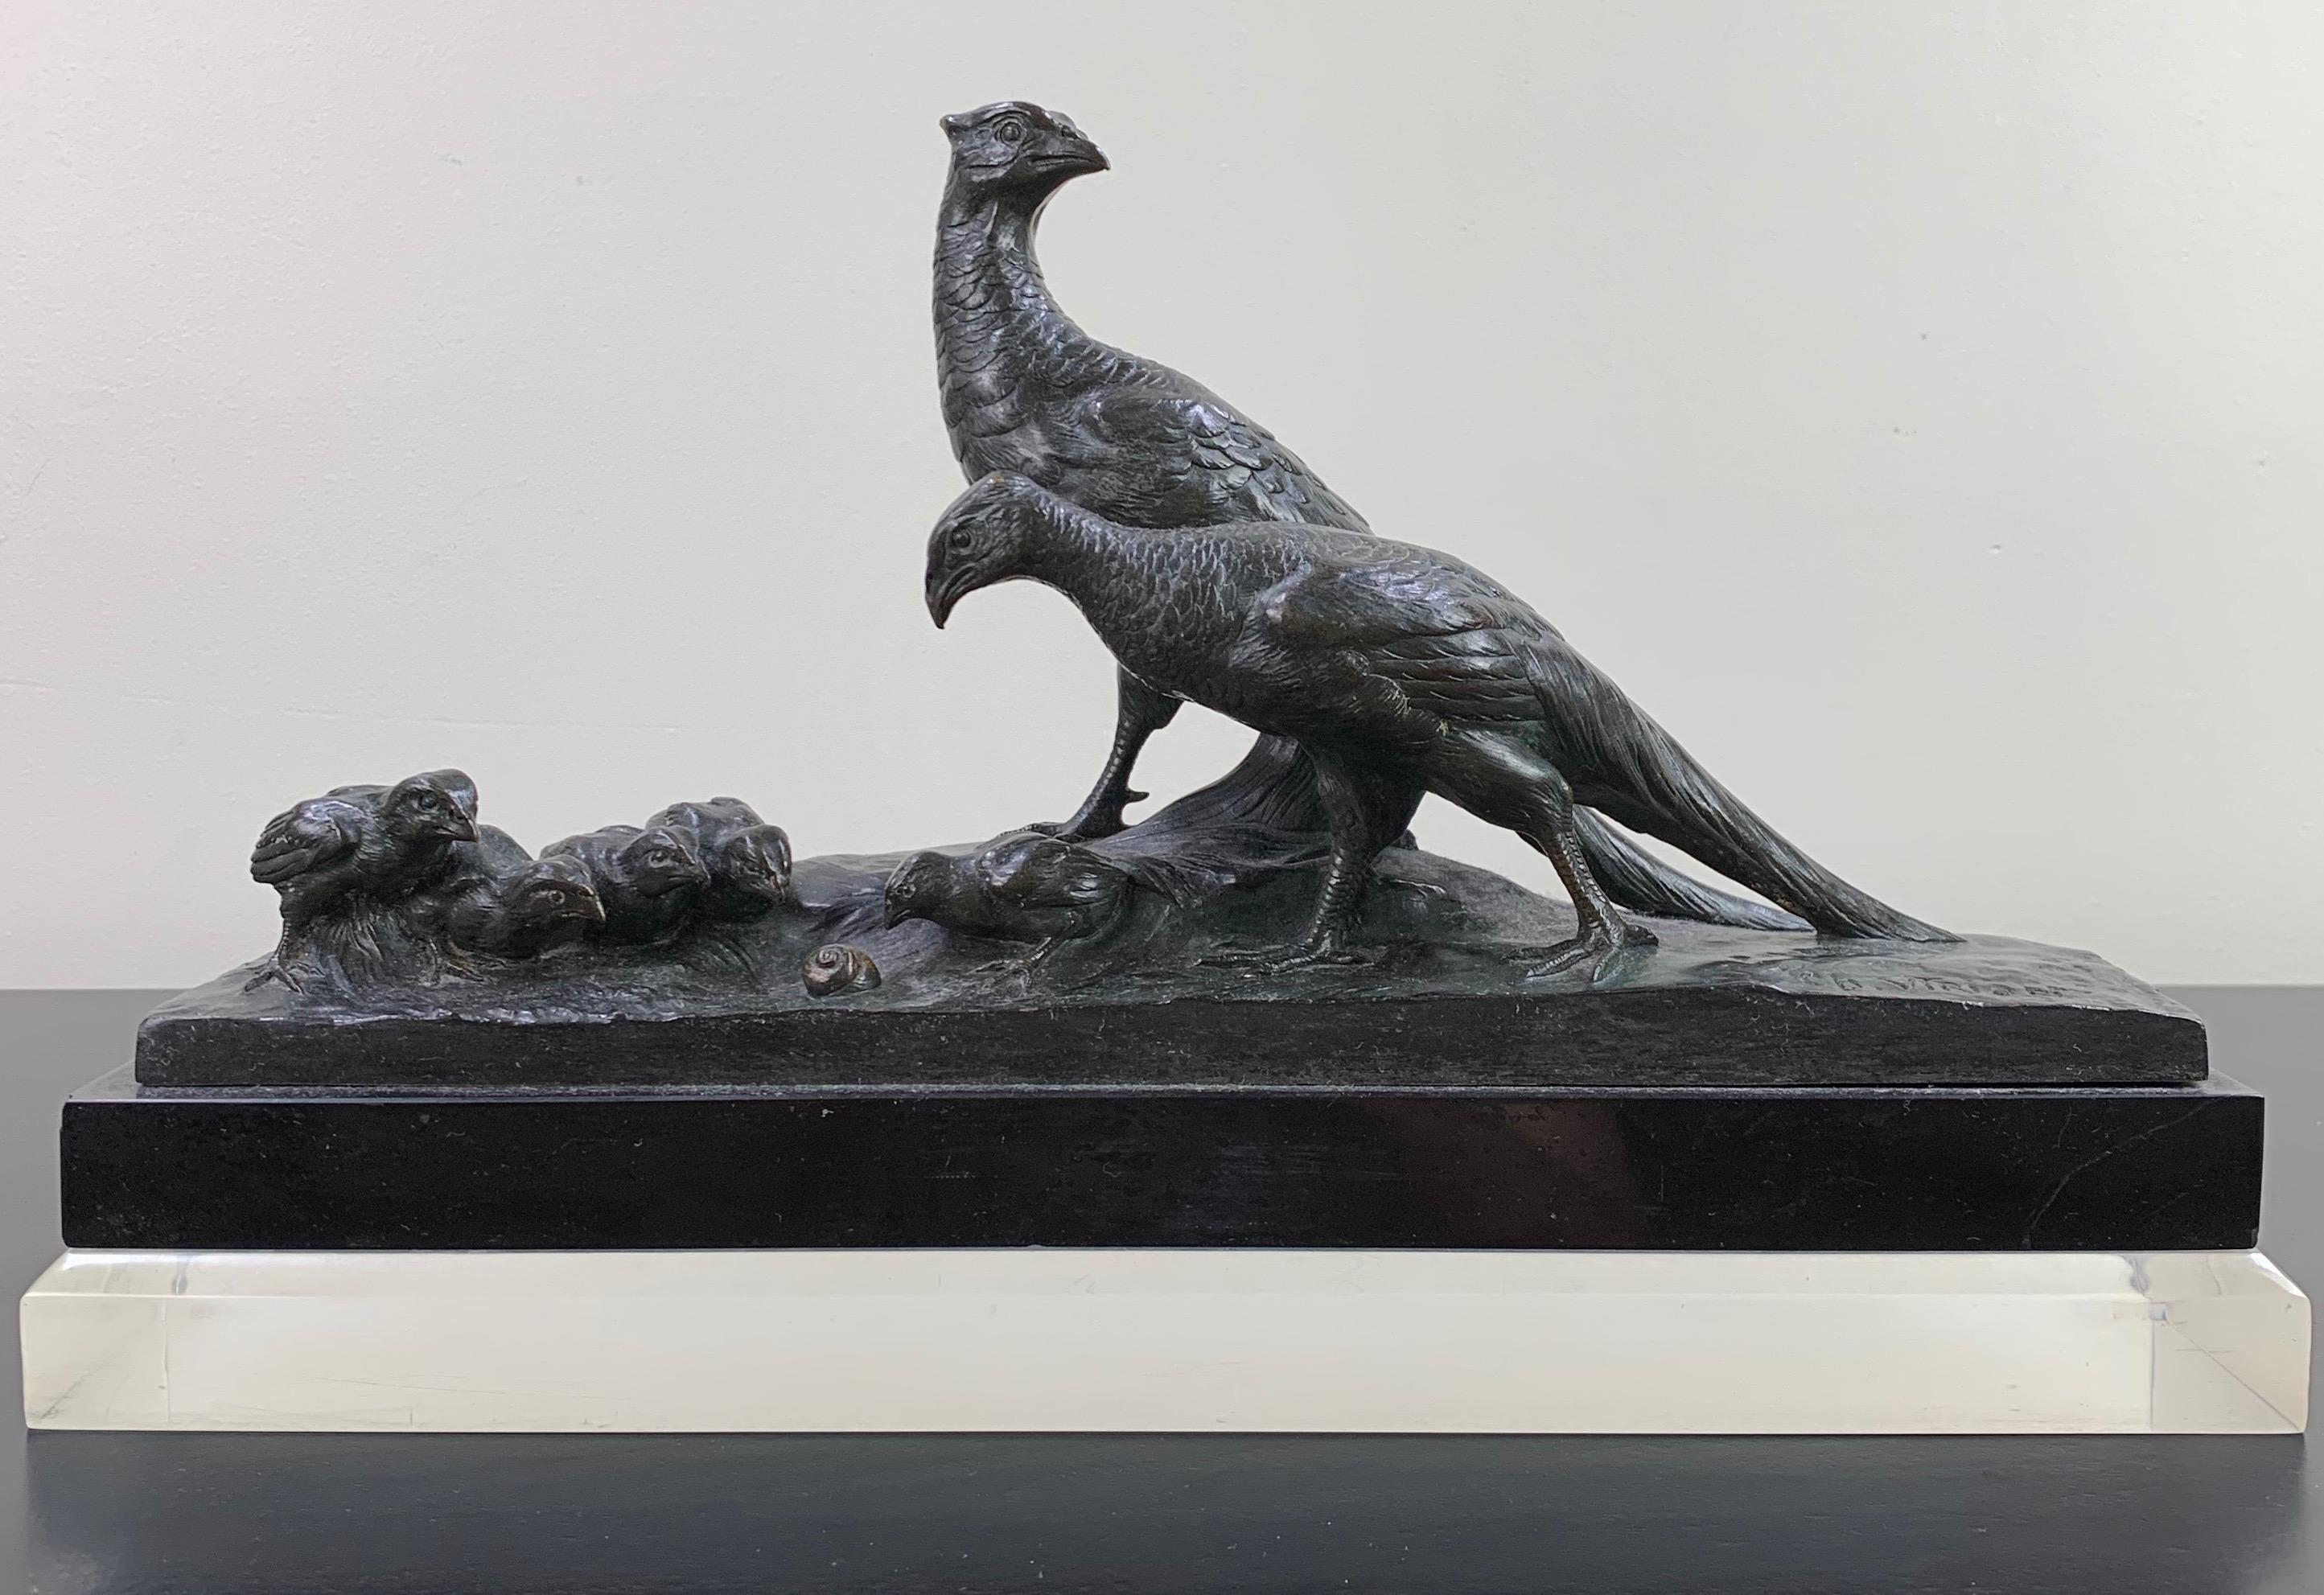 Study in Bronze of a family of pheasants surrounding a snail, signed with foundry mark.

Charles Louis Eugène Virion (1865-1946) was a noted French sculptor and ceramicist, principally of animals. Virion studied sculpture in Paris under Jean-Paul